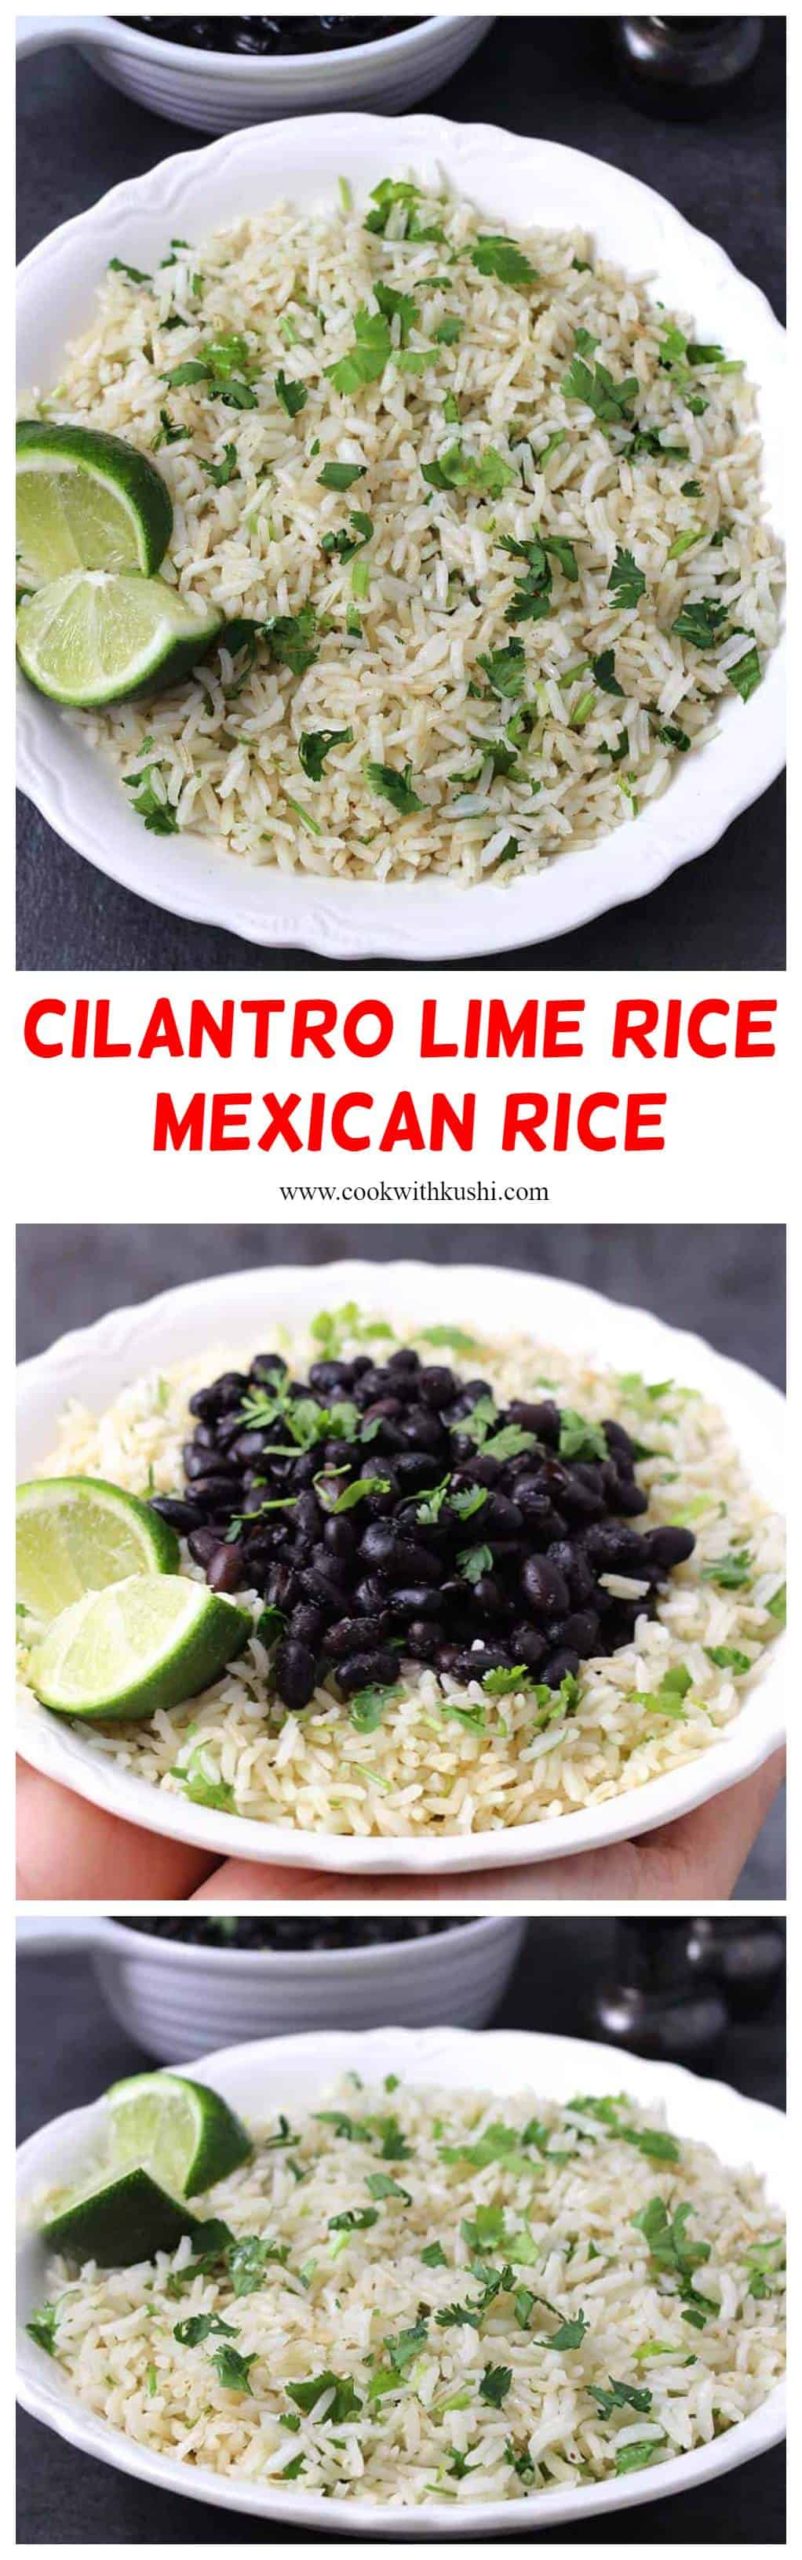  Cilantro Lime Rice or Mexican Rice is vegan and gluten free, best and easy to make rice recipe for rice bowls, burritos prepared in less than 20 minutes with basic ingredients from your kitchen. #chipotle #qdoba #cilantrolimerice #cauliflowerrice #instantpot #keto #glutenfree #vegan #vegetarian #Mexicanrice #blackbeans #refriedbeans #mexicanrecipes #restaurant #brownrice #whiterice #chipotlecopycatrecipes 